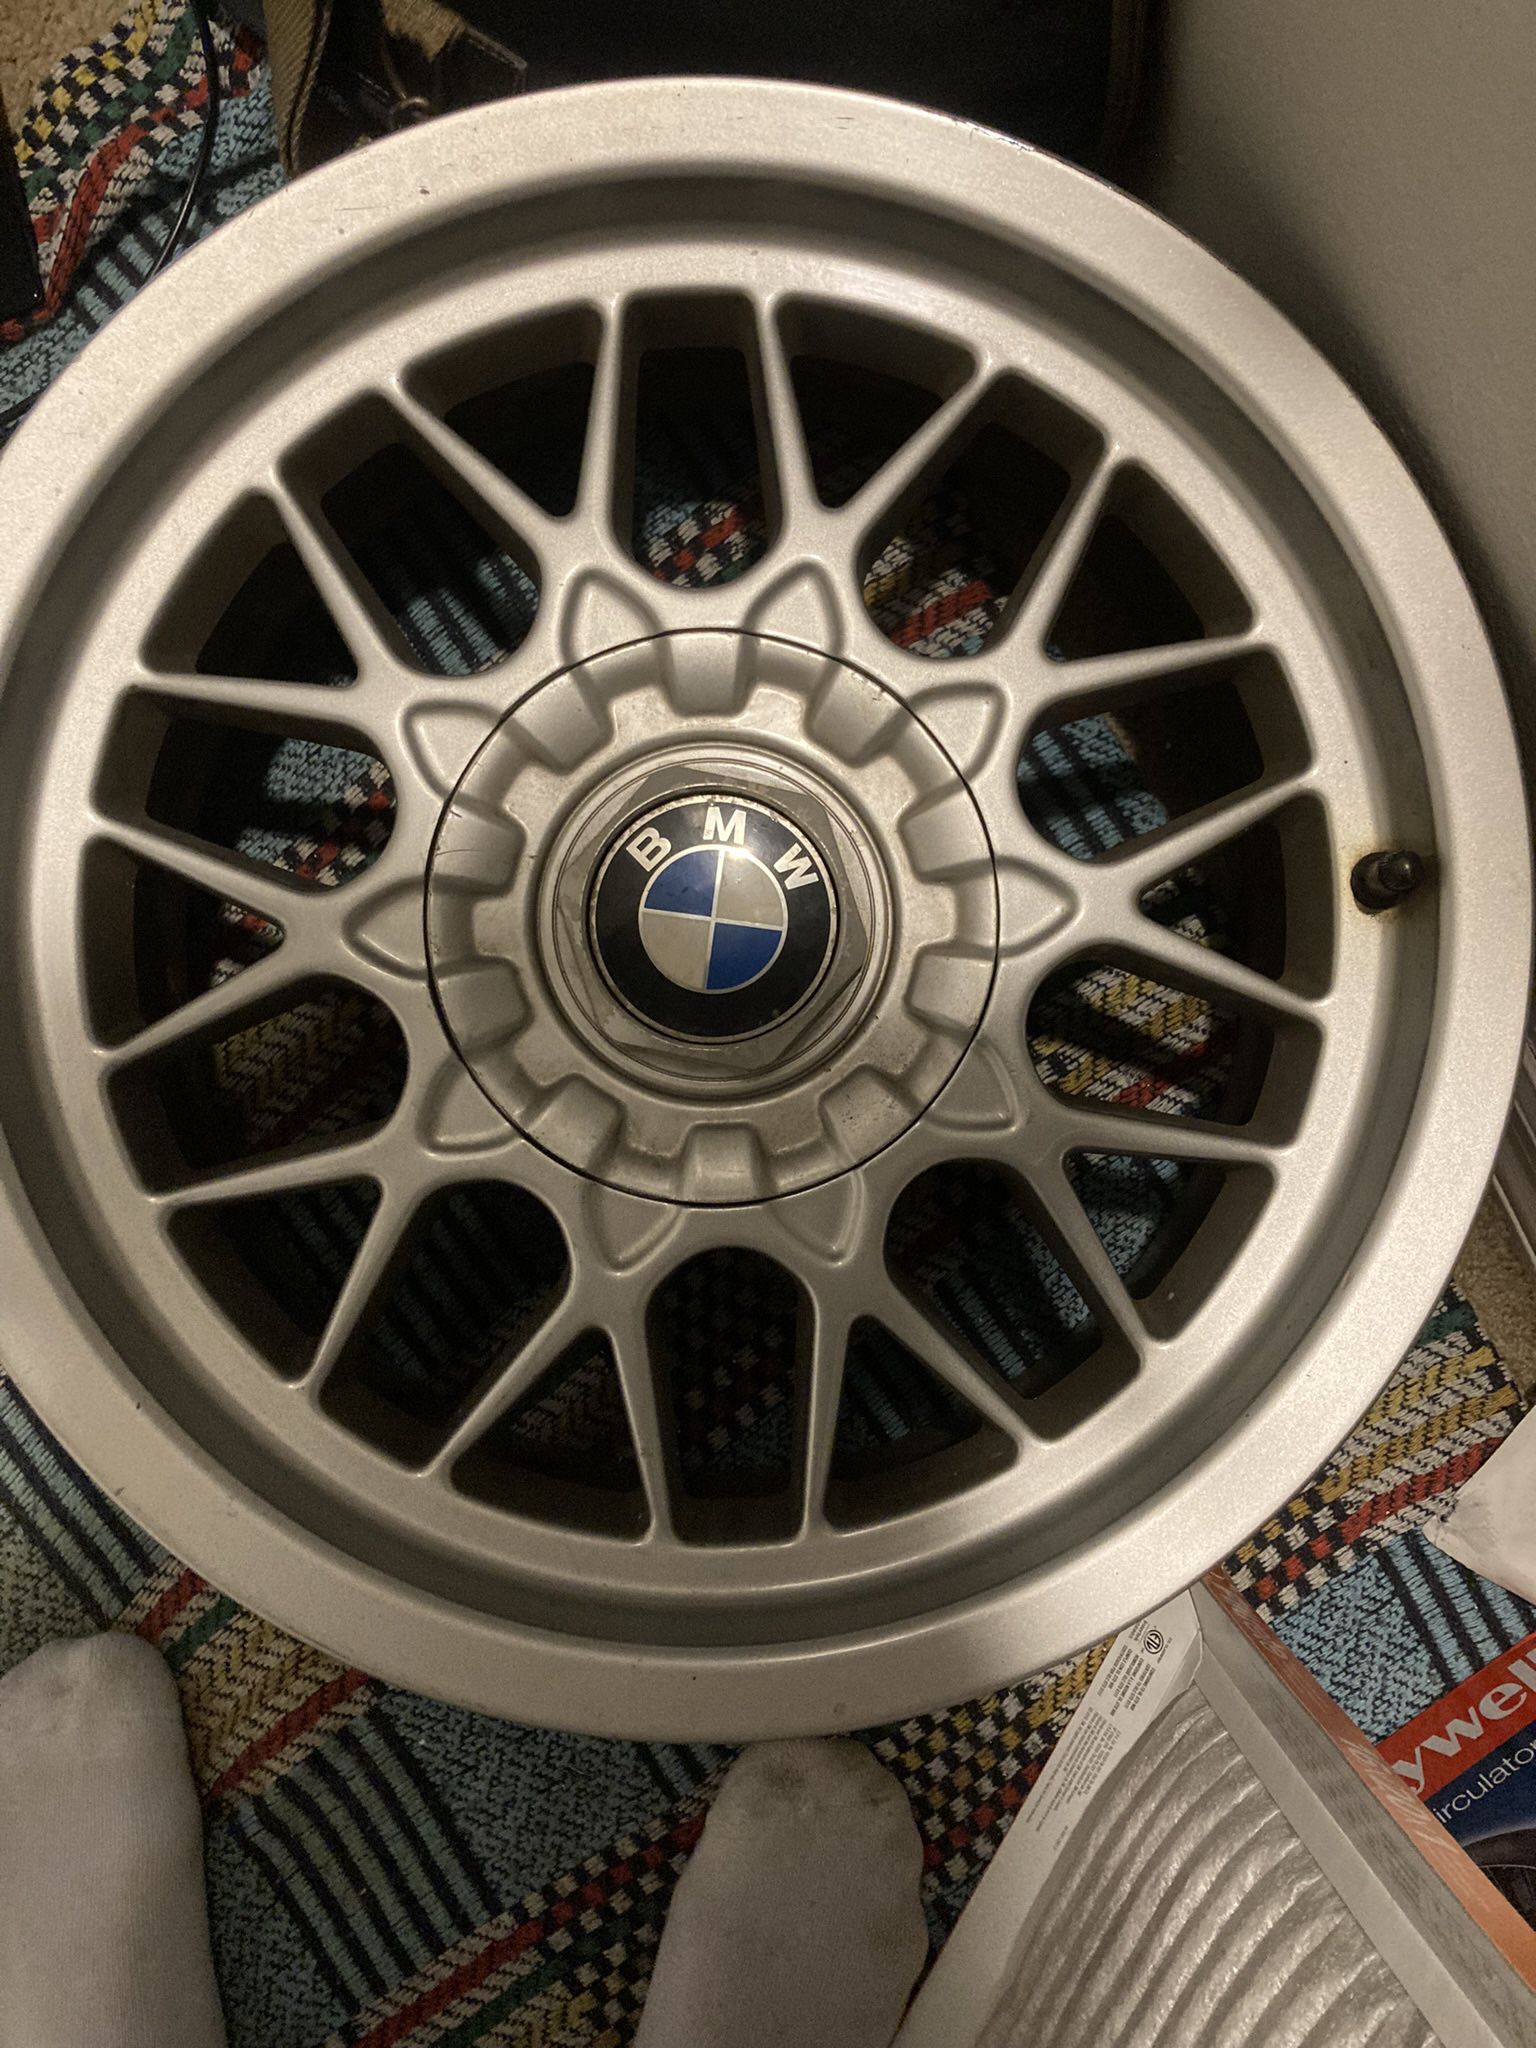 Bmw 528i bbs stock rims(only have 3 owner didn’t have all 4)